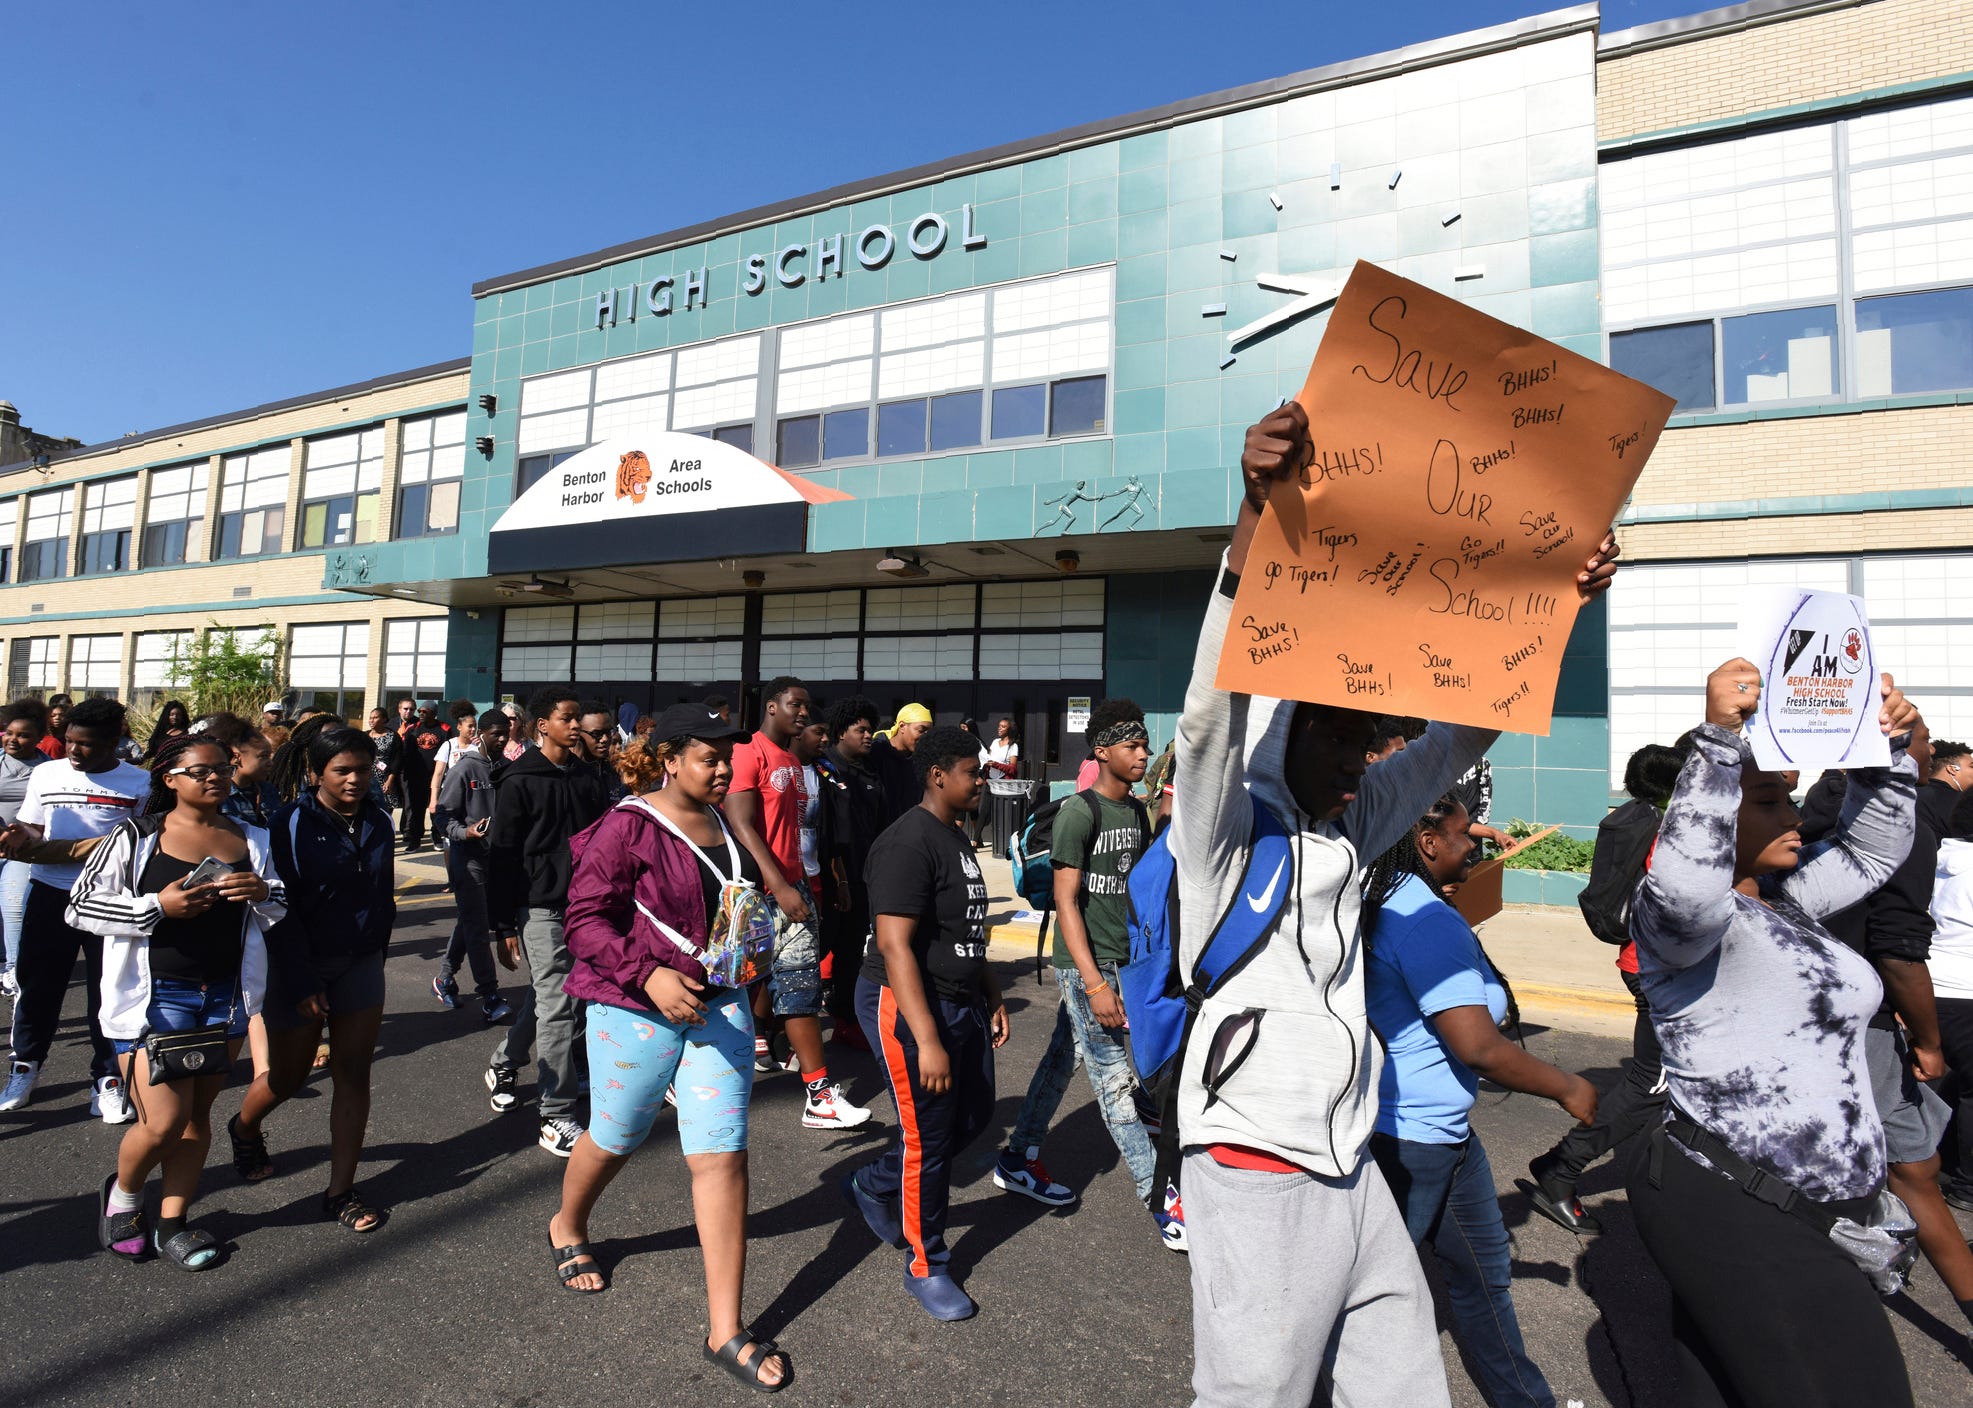 Students walk past the front of the high school in Benton Harbor earlier this month in preparation of an annual Peace Walk held at the end of the school year.